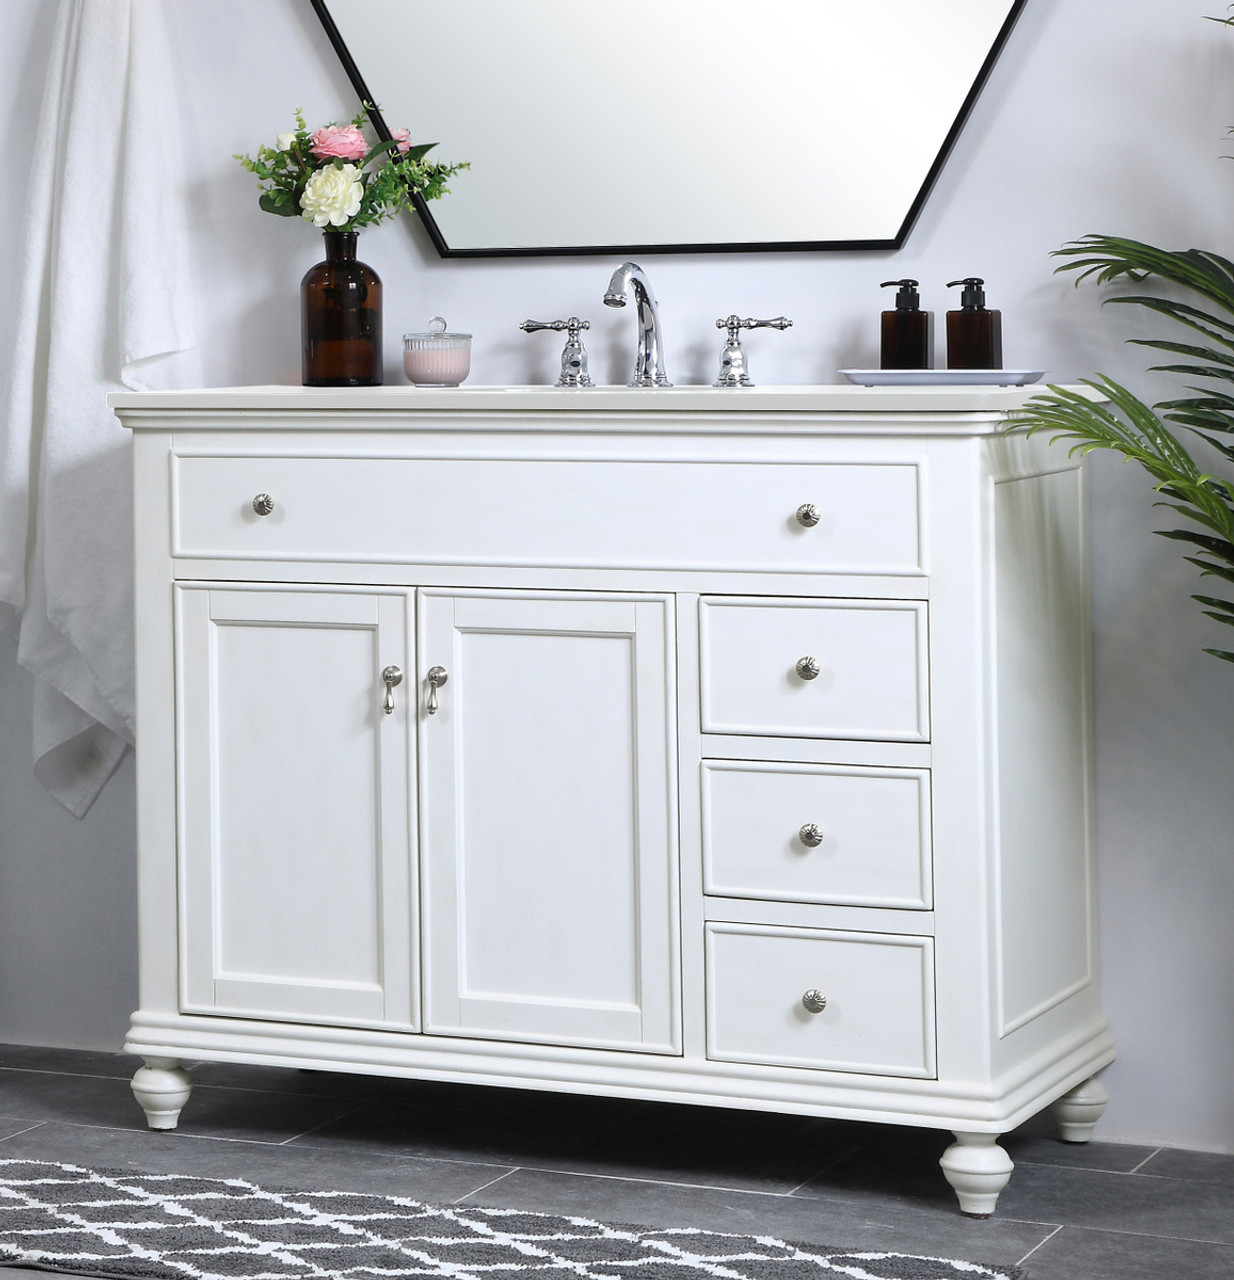 Elegant Kitchen and Bath VF12342AW-VW 42 inch Single Bathroom vanity in antique white with ivory white engineered marble